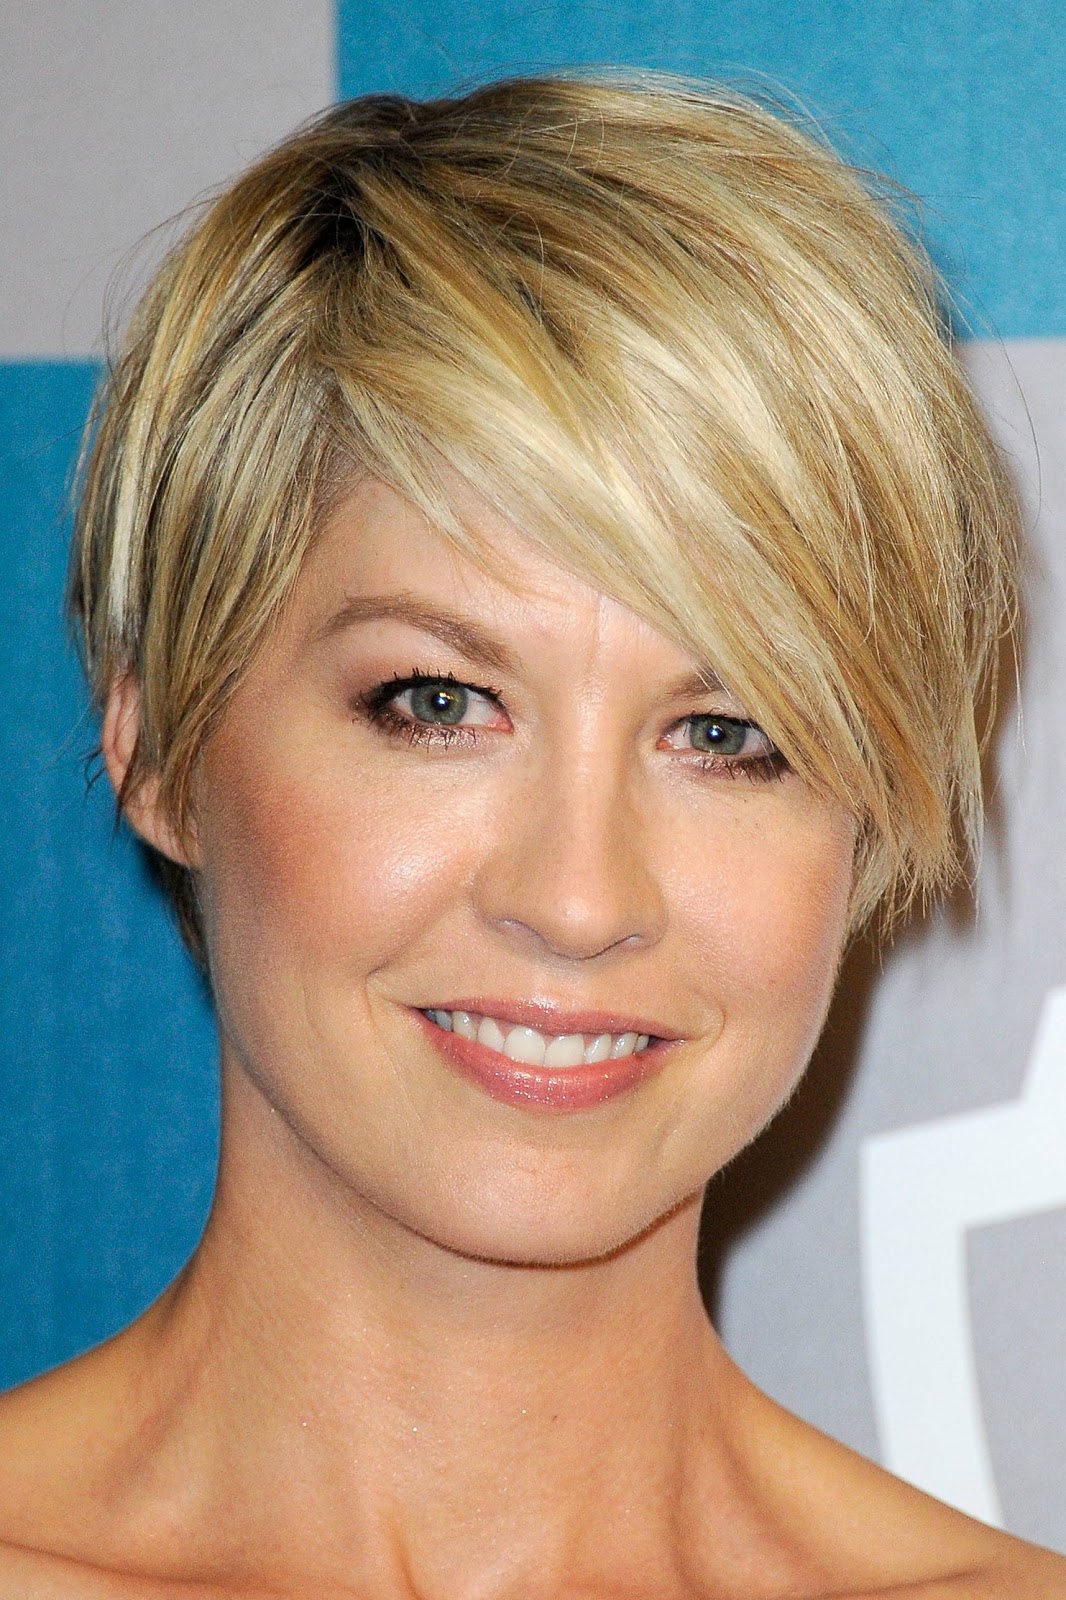 Short Celebrity Hairstyles ~ The Stylista for Salon Confidential Magazine